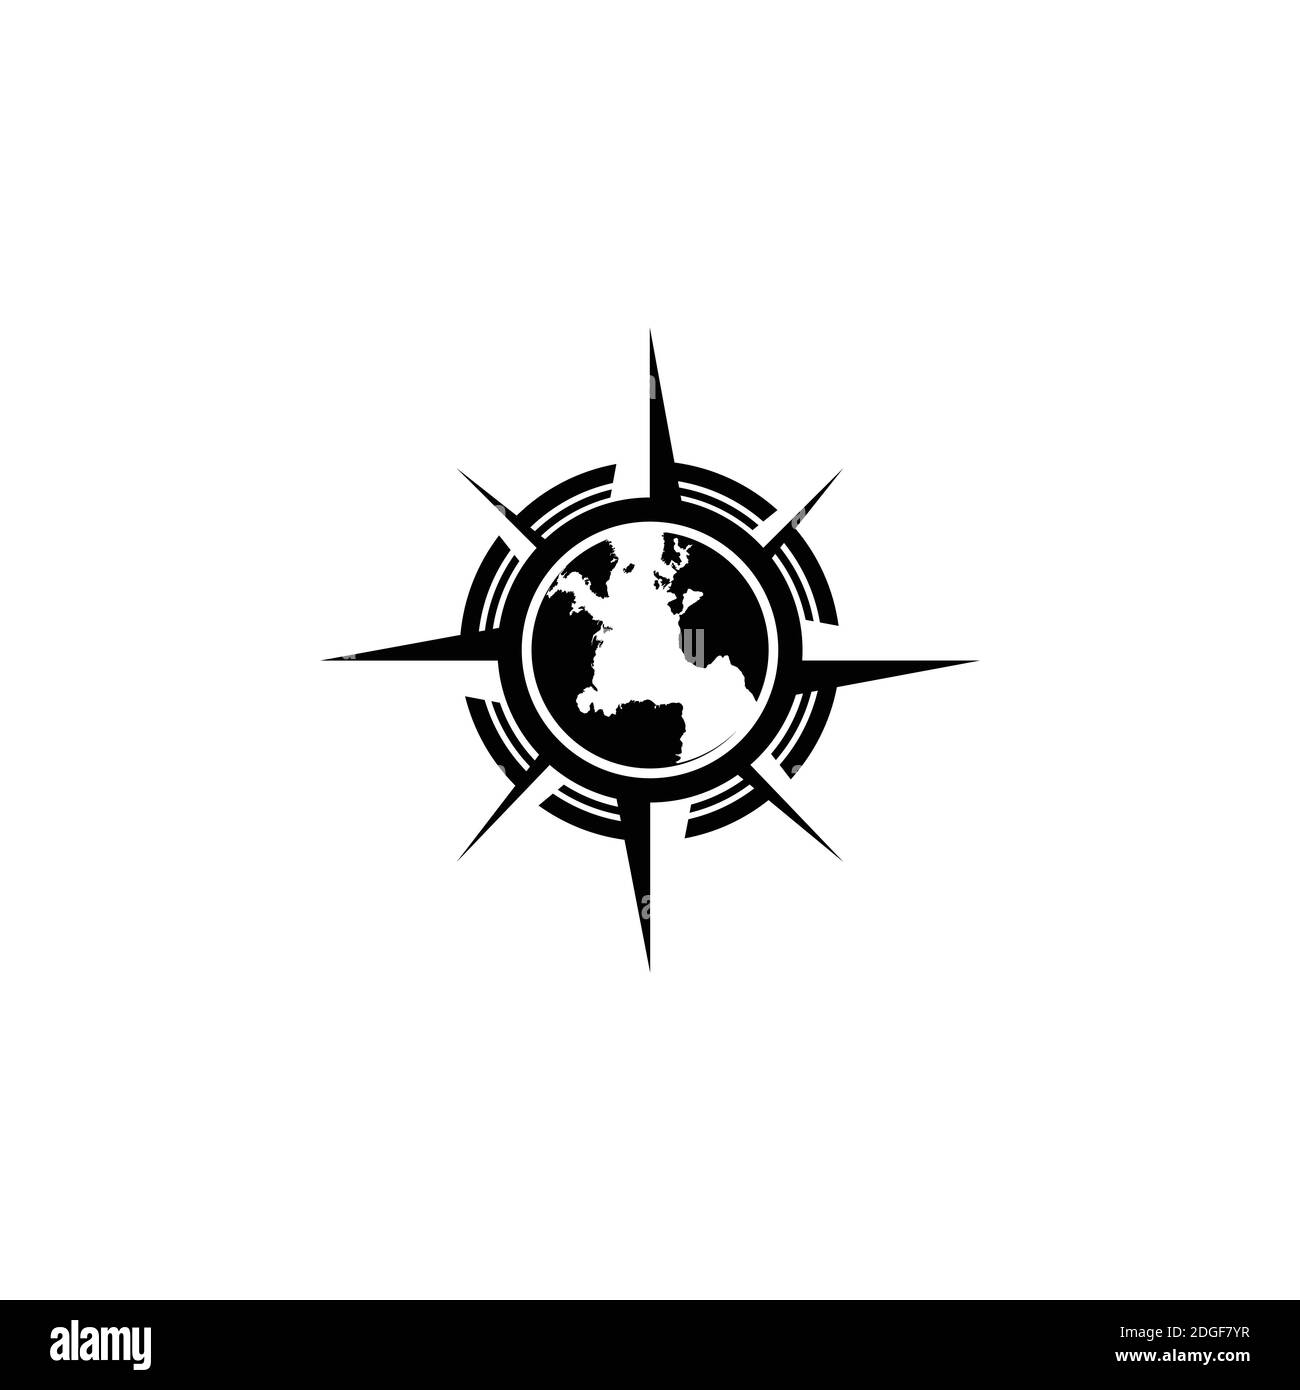 Globe world compass north east west south logo vector image Stock Vector